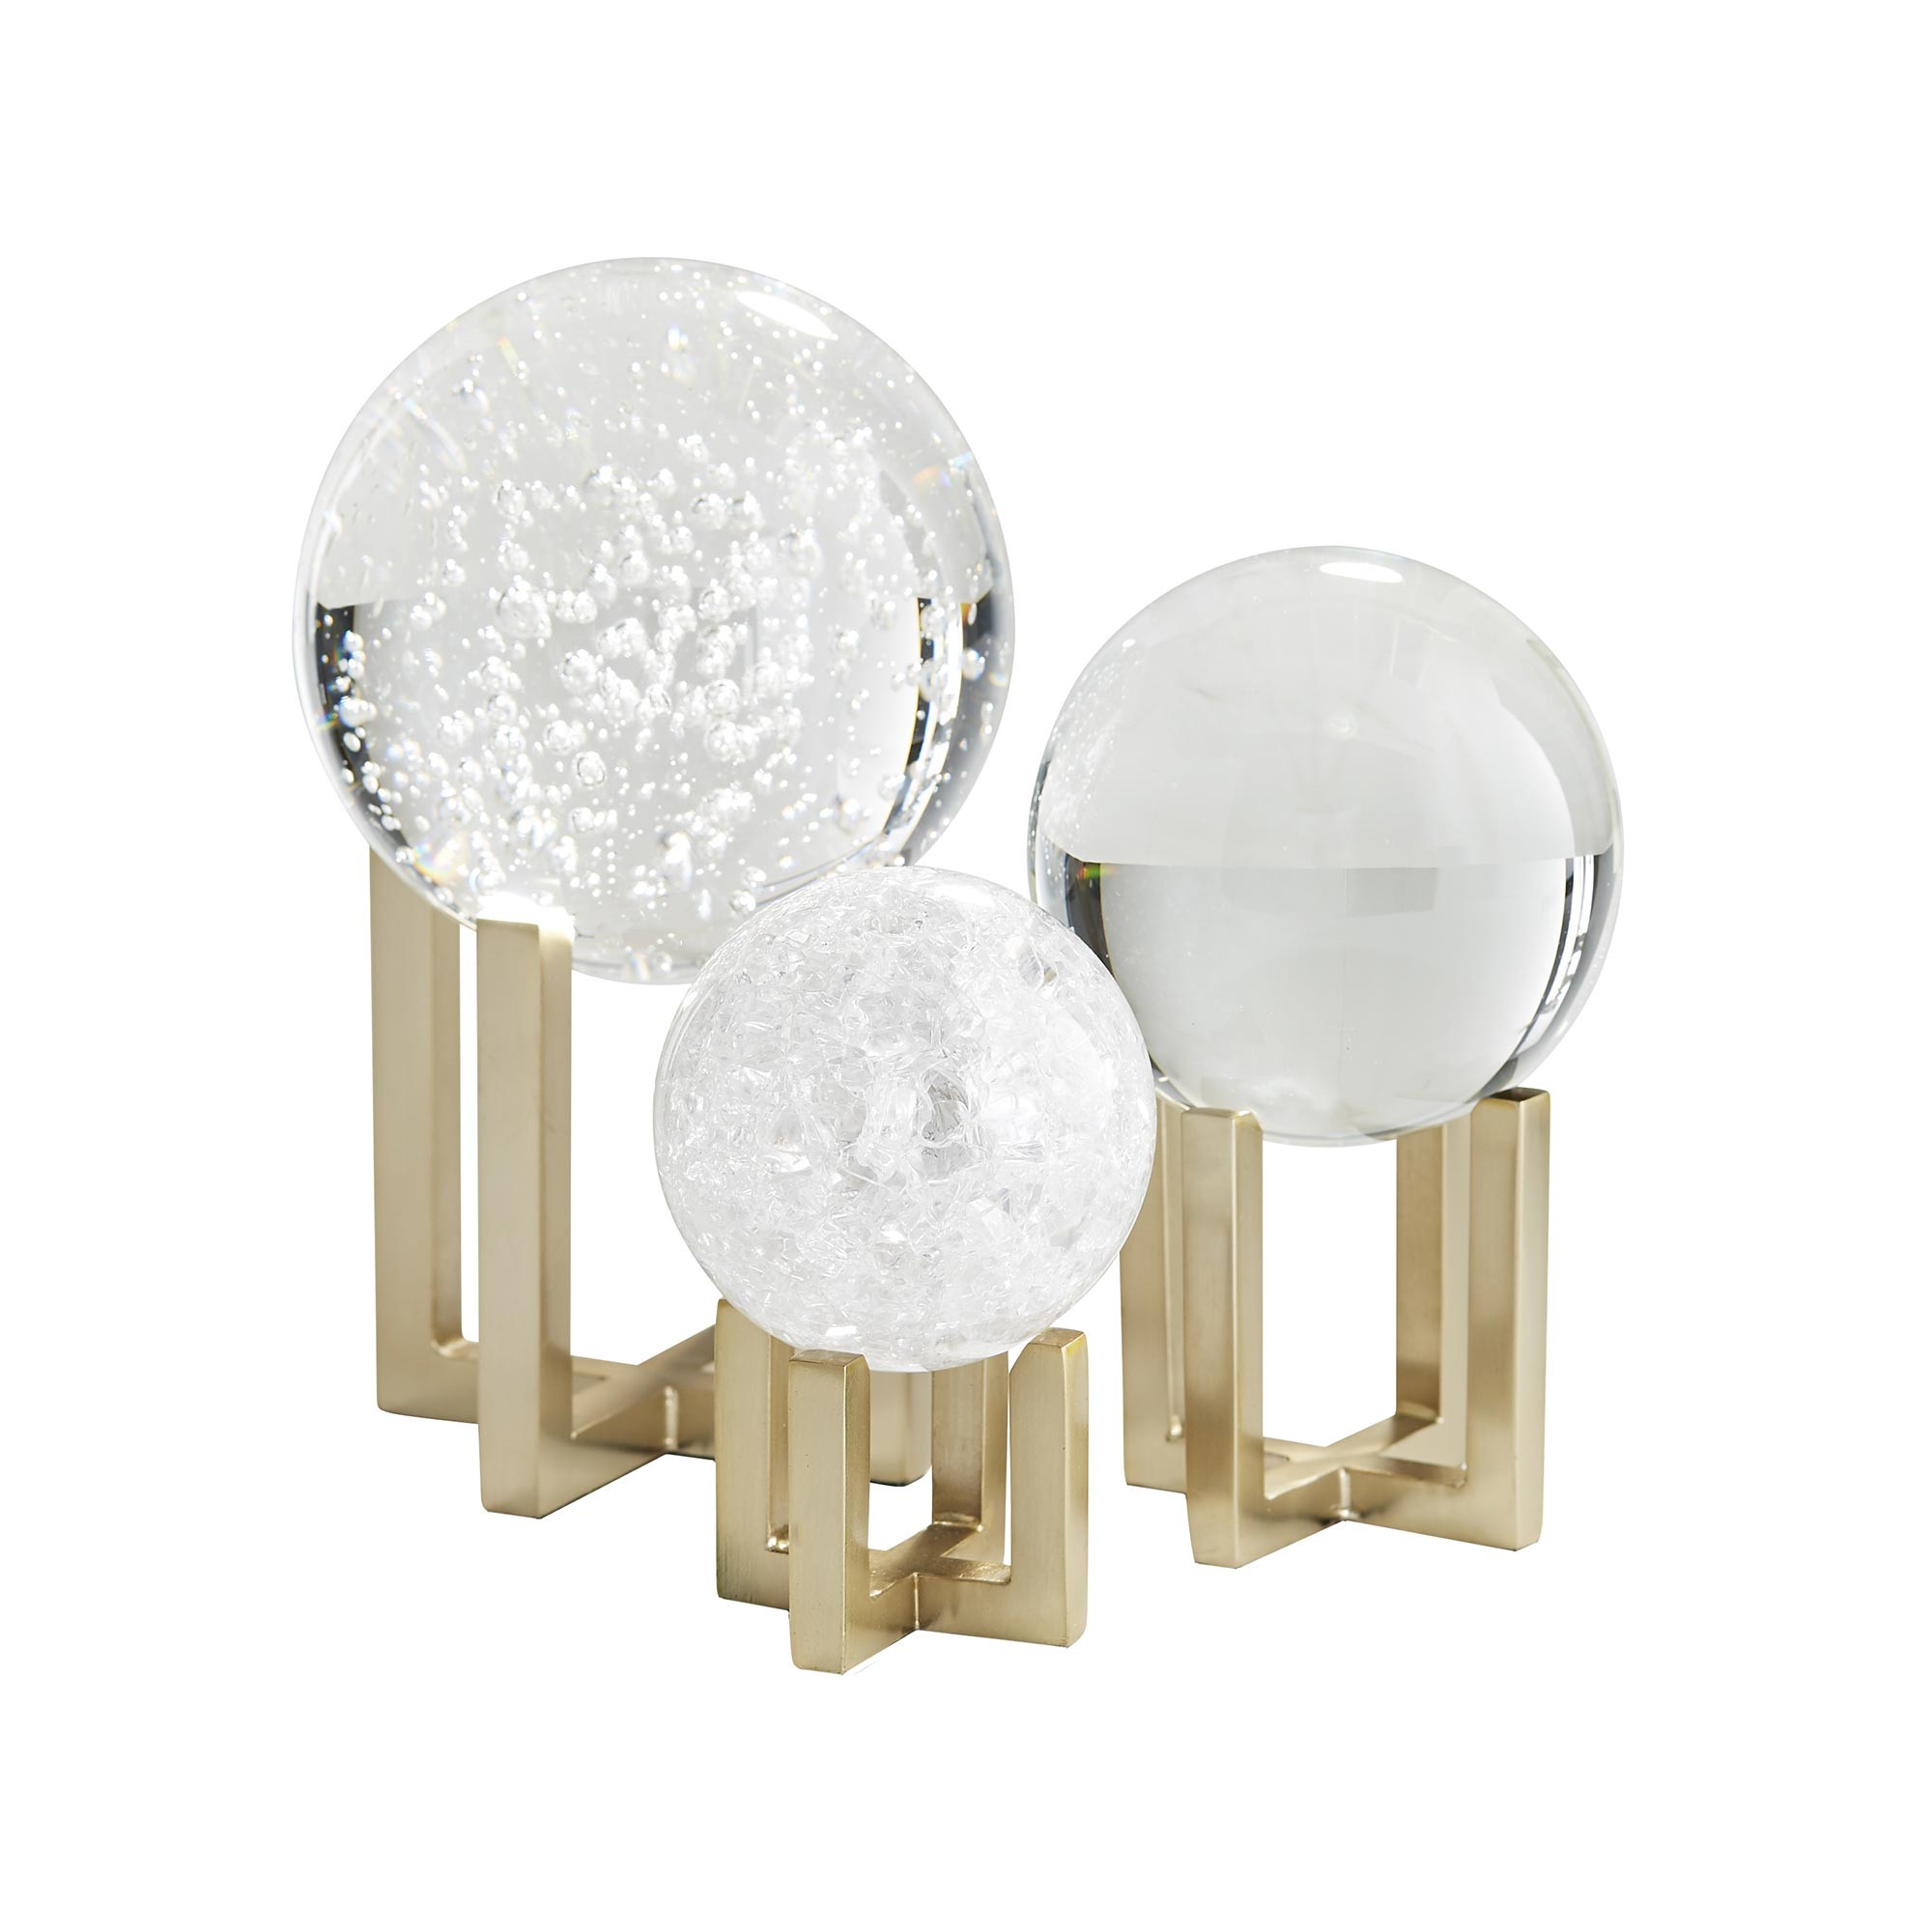 Crystal Muses Sculpture, set of 3-$472.00